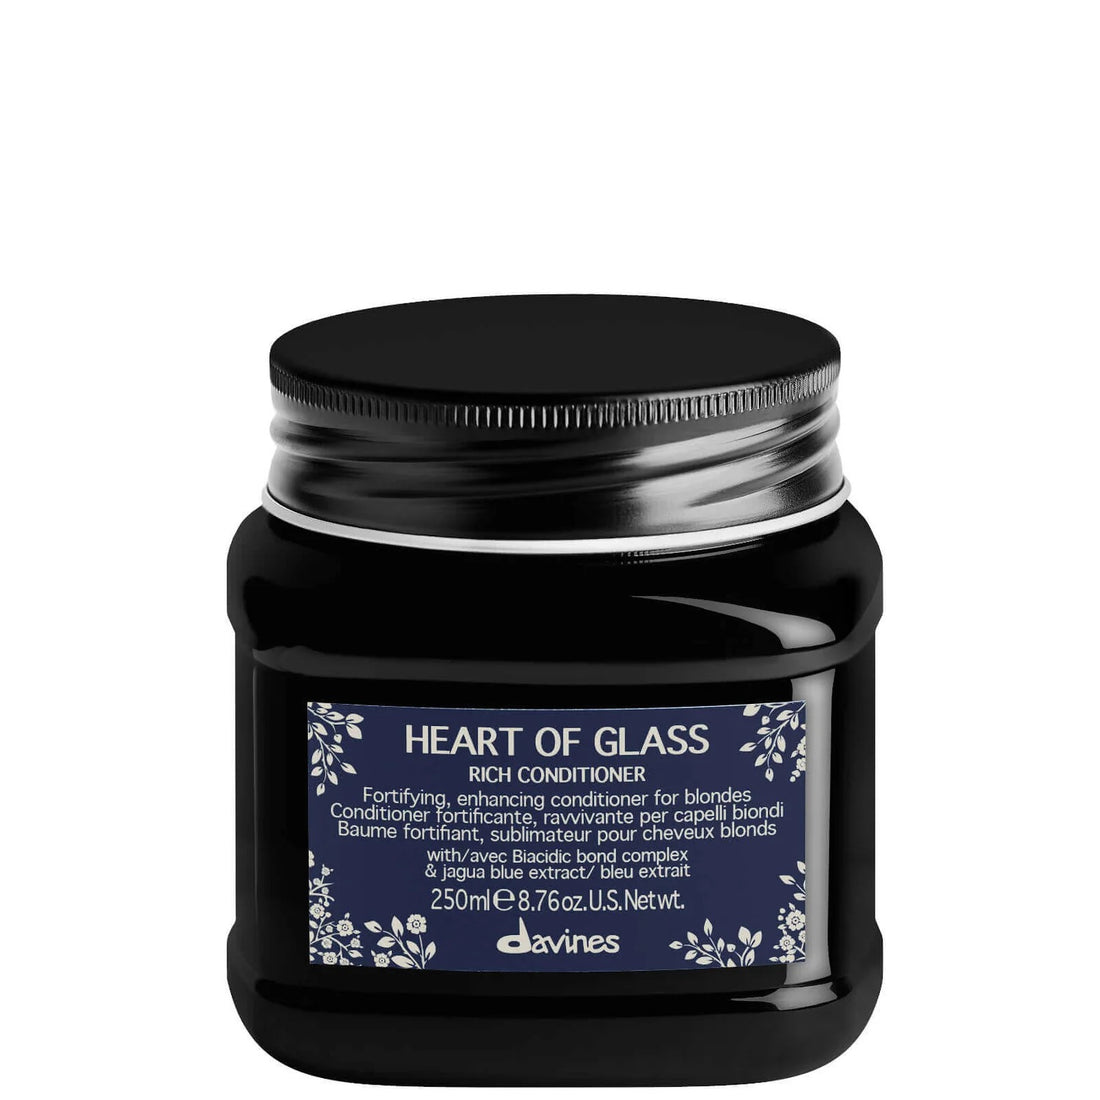 Davines Heart of Glass Blonde Shampoo and Conditioner Haircare Duo